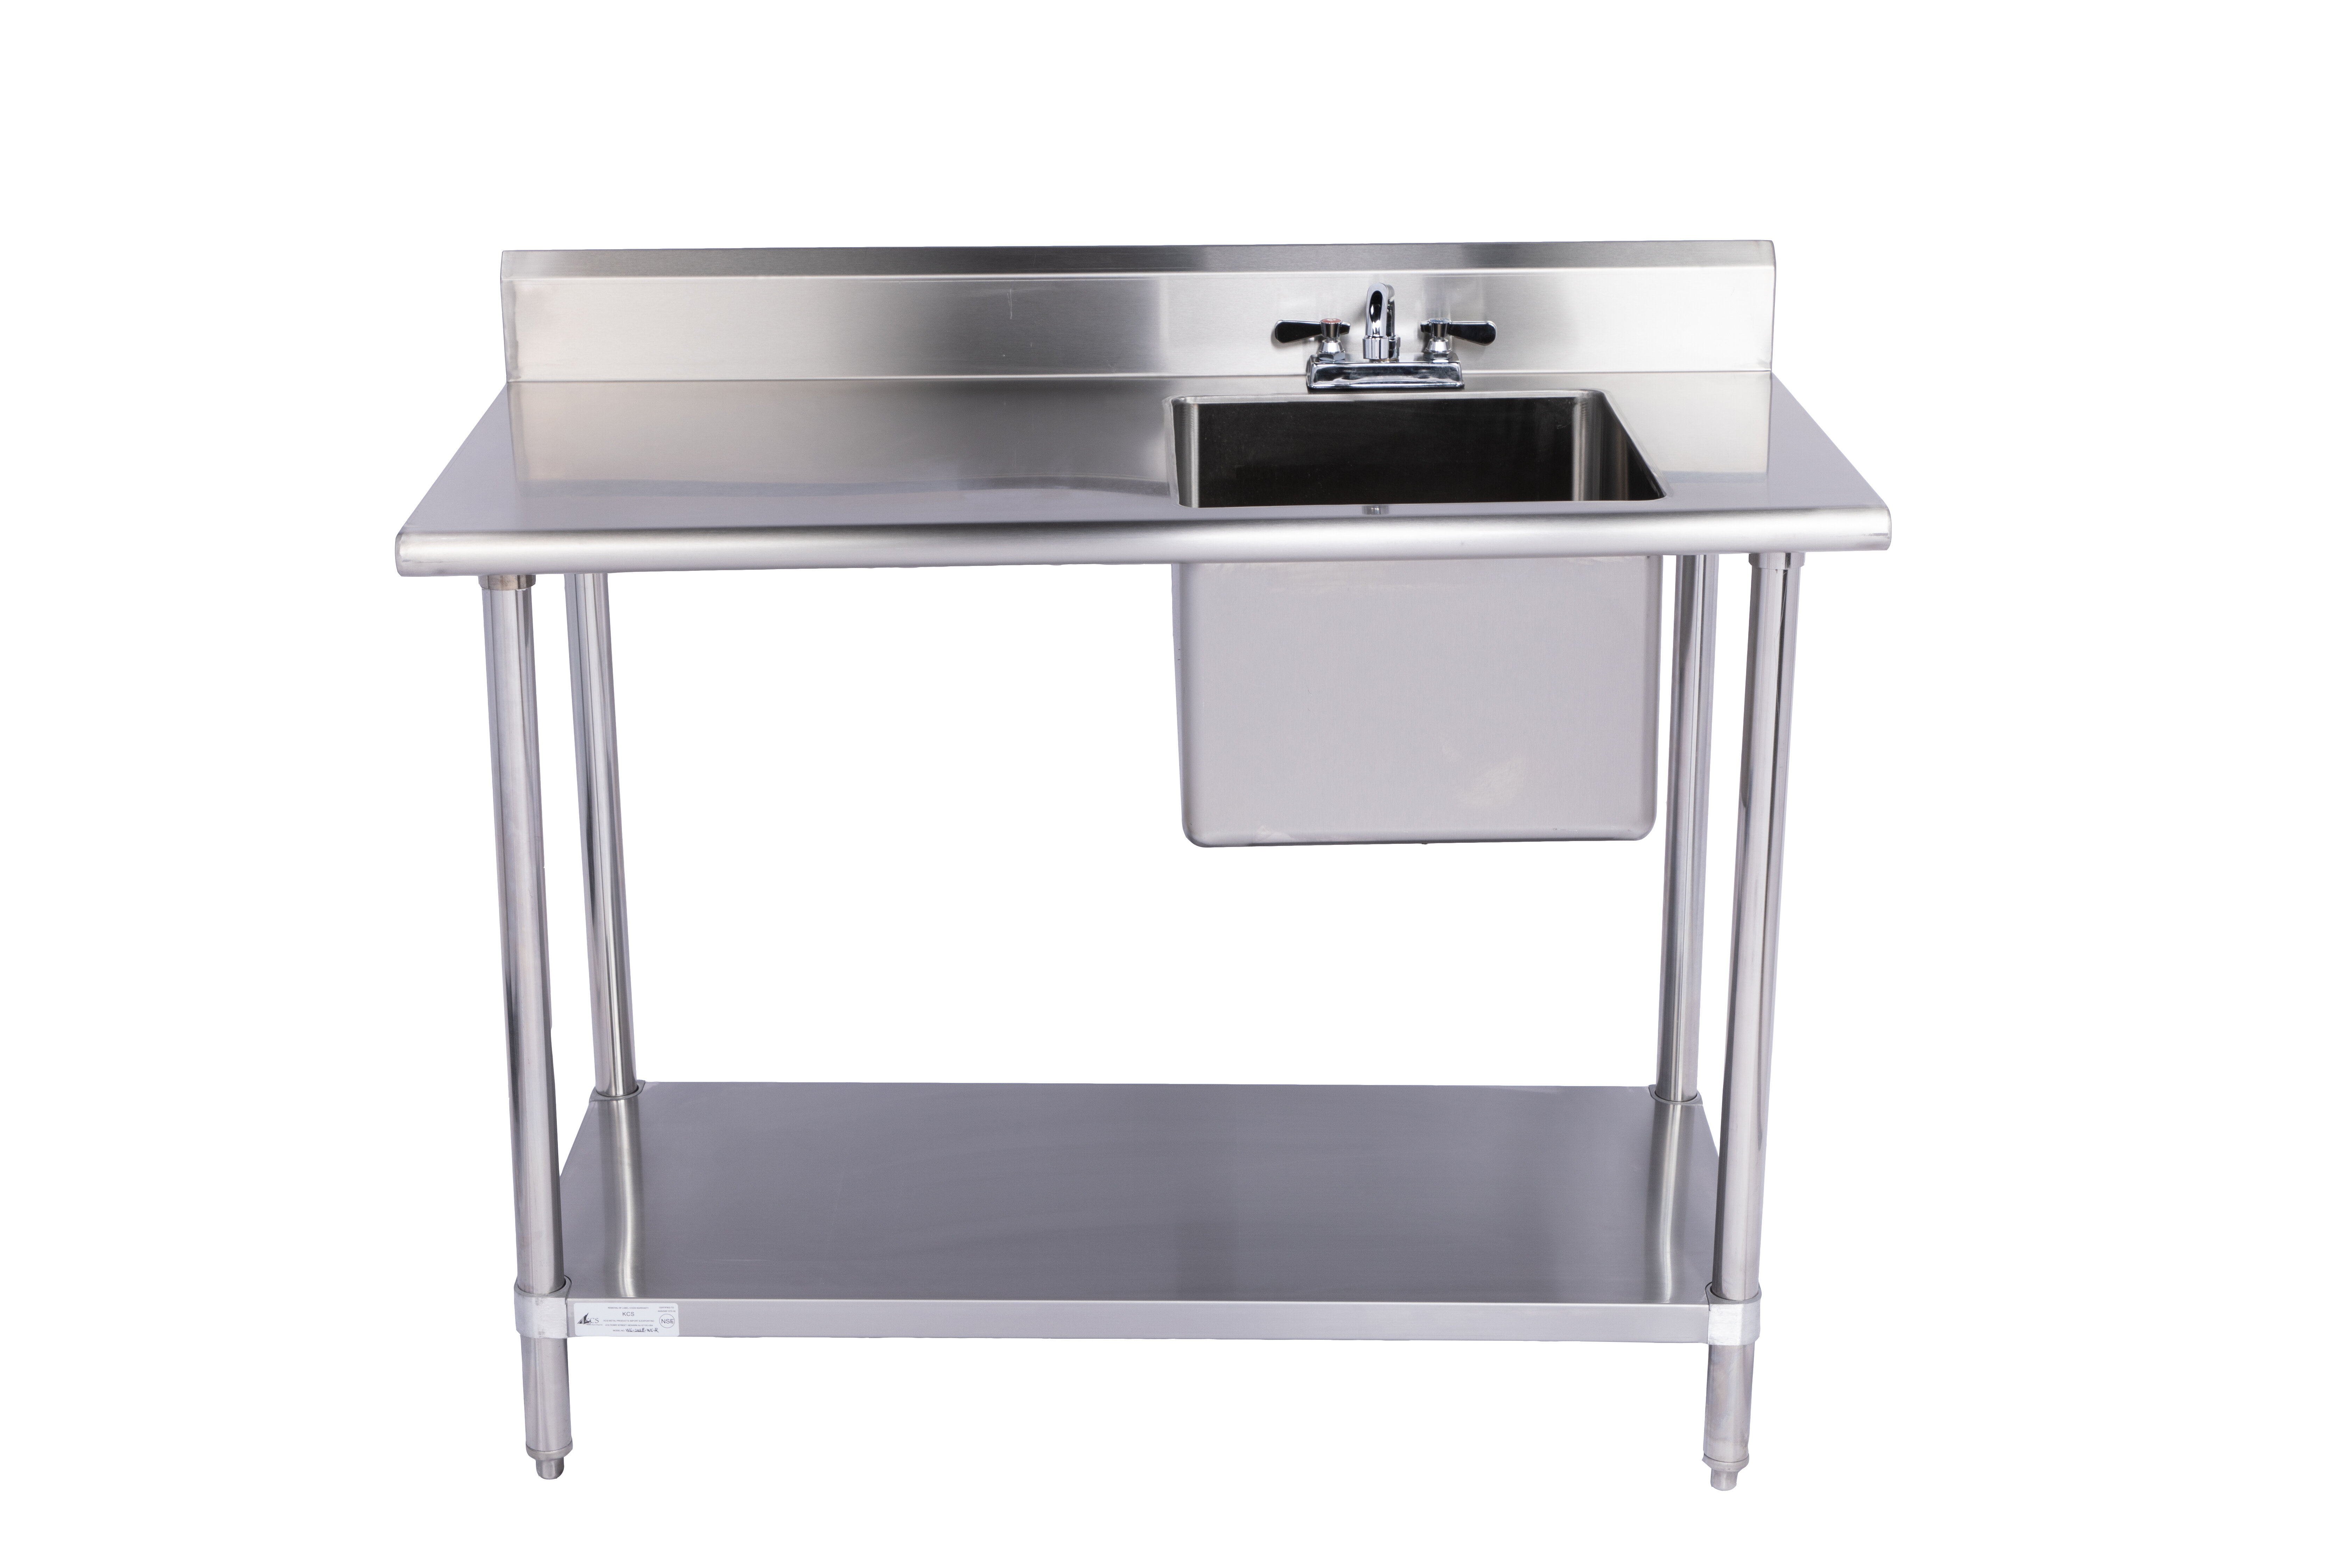 JDEFEG Under Sink Tray 304 Stainless Press Steel Press Meat Manual Pie Meat  Kitchen，Dining Bar Over Kitchen Sink Shelf for Tall Faucet Stainless Steel  Green 